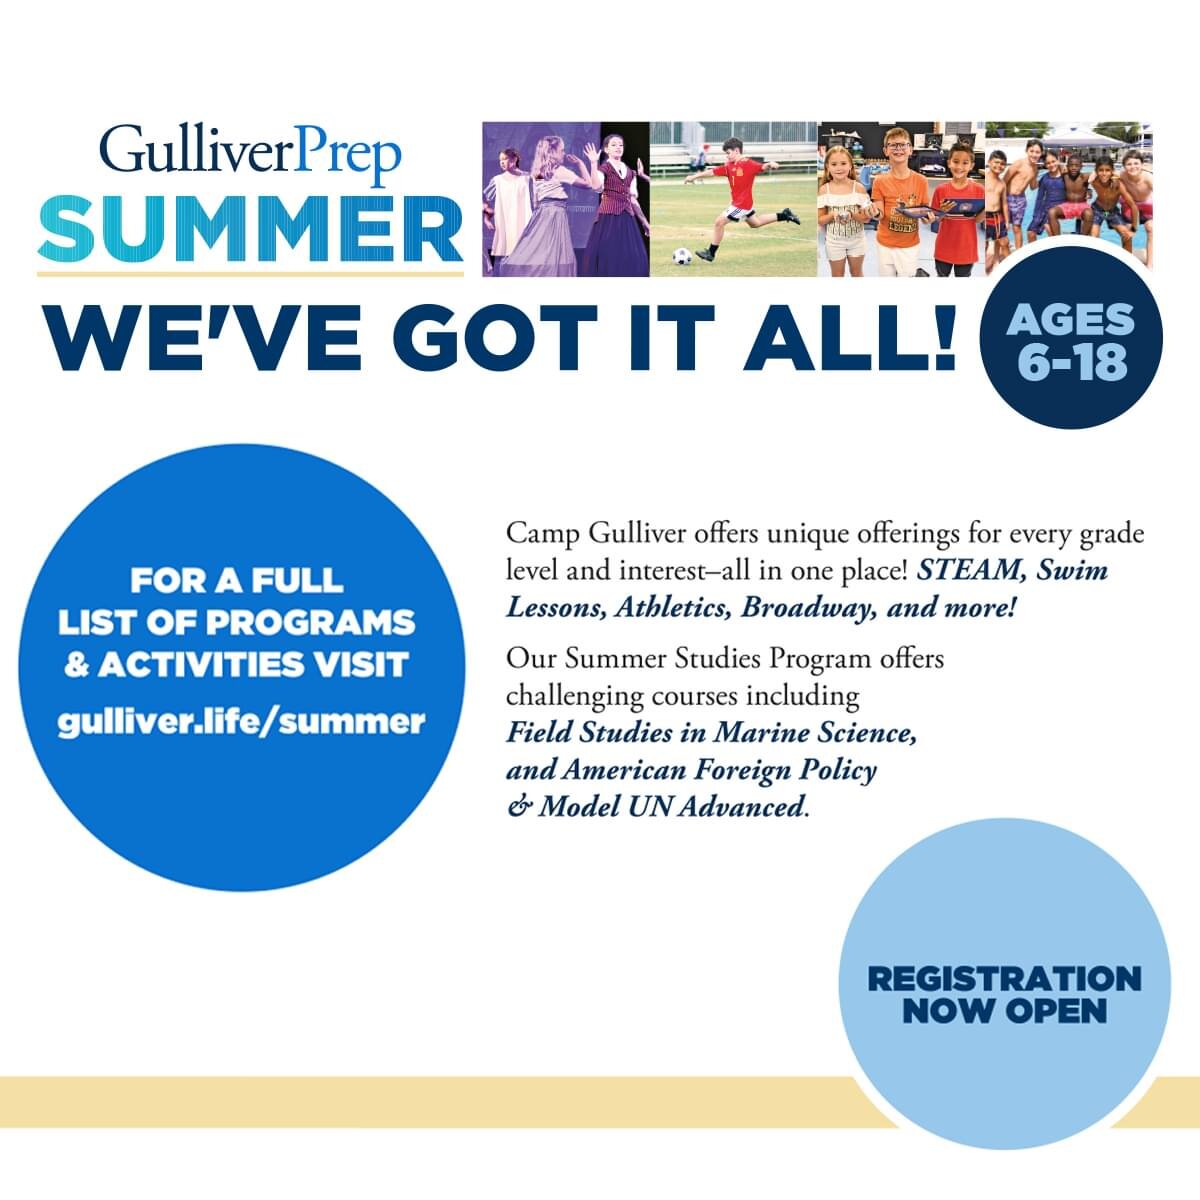 Gulliver Prep Summer has it all! Camp Gulliver offers unique offerings from STEAM, Swim Lessons, Athletics, Broadway, and more for ages 6-18 all in one place!

Register today at gulliver.life/summer.

#ProudRaiderFamilies #GulliverPride #Gulliverdiff